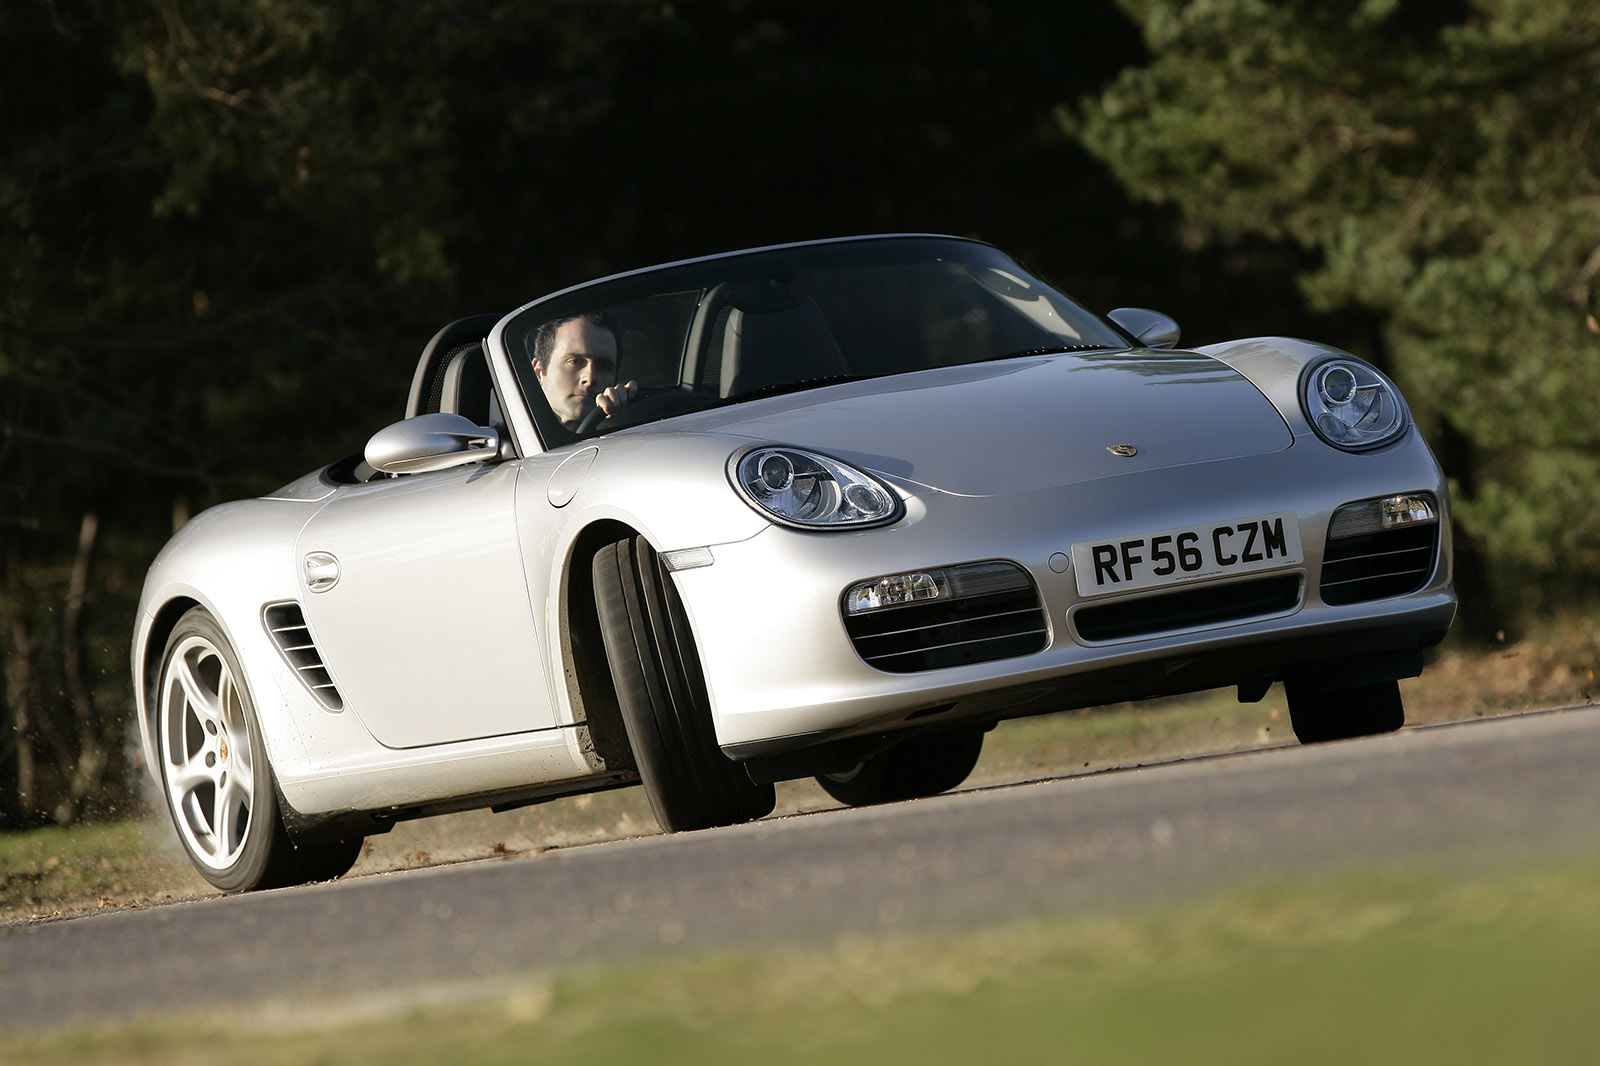 Used car buying guide: Porsche Boxster (987)